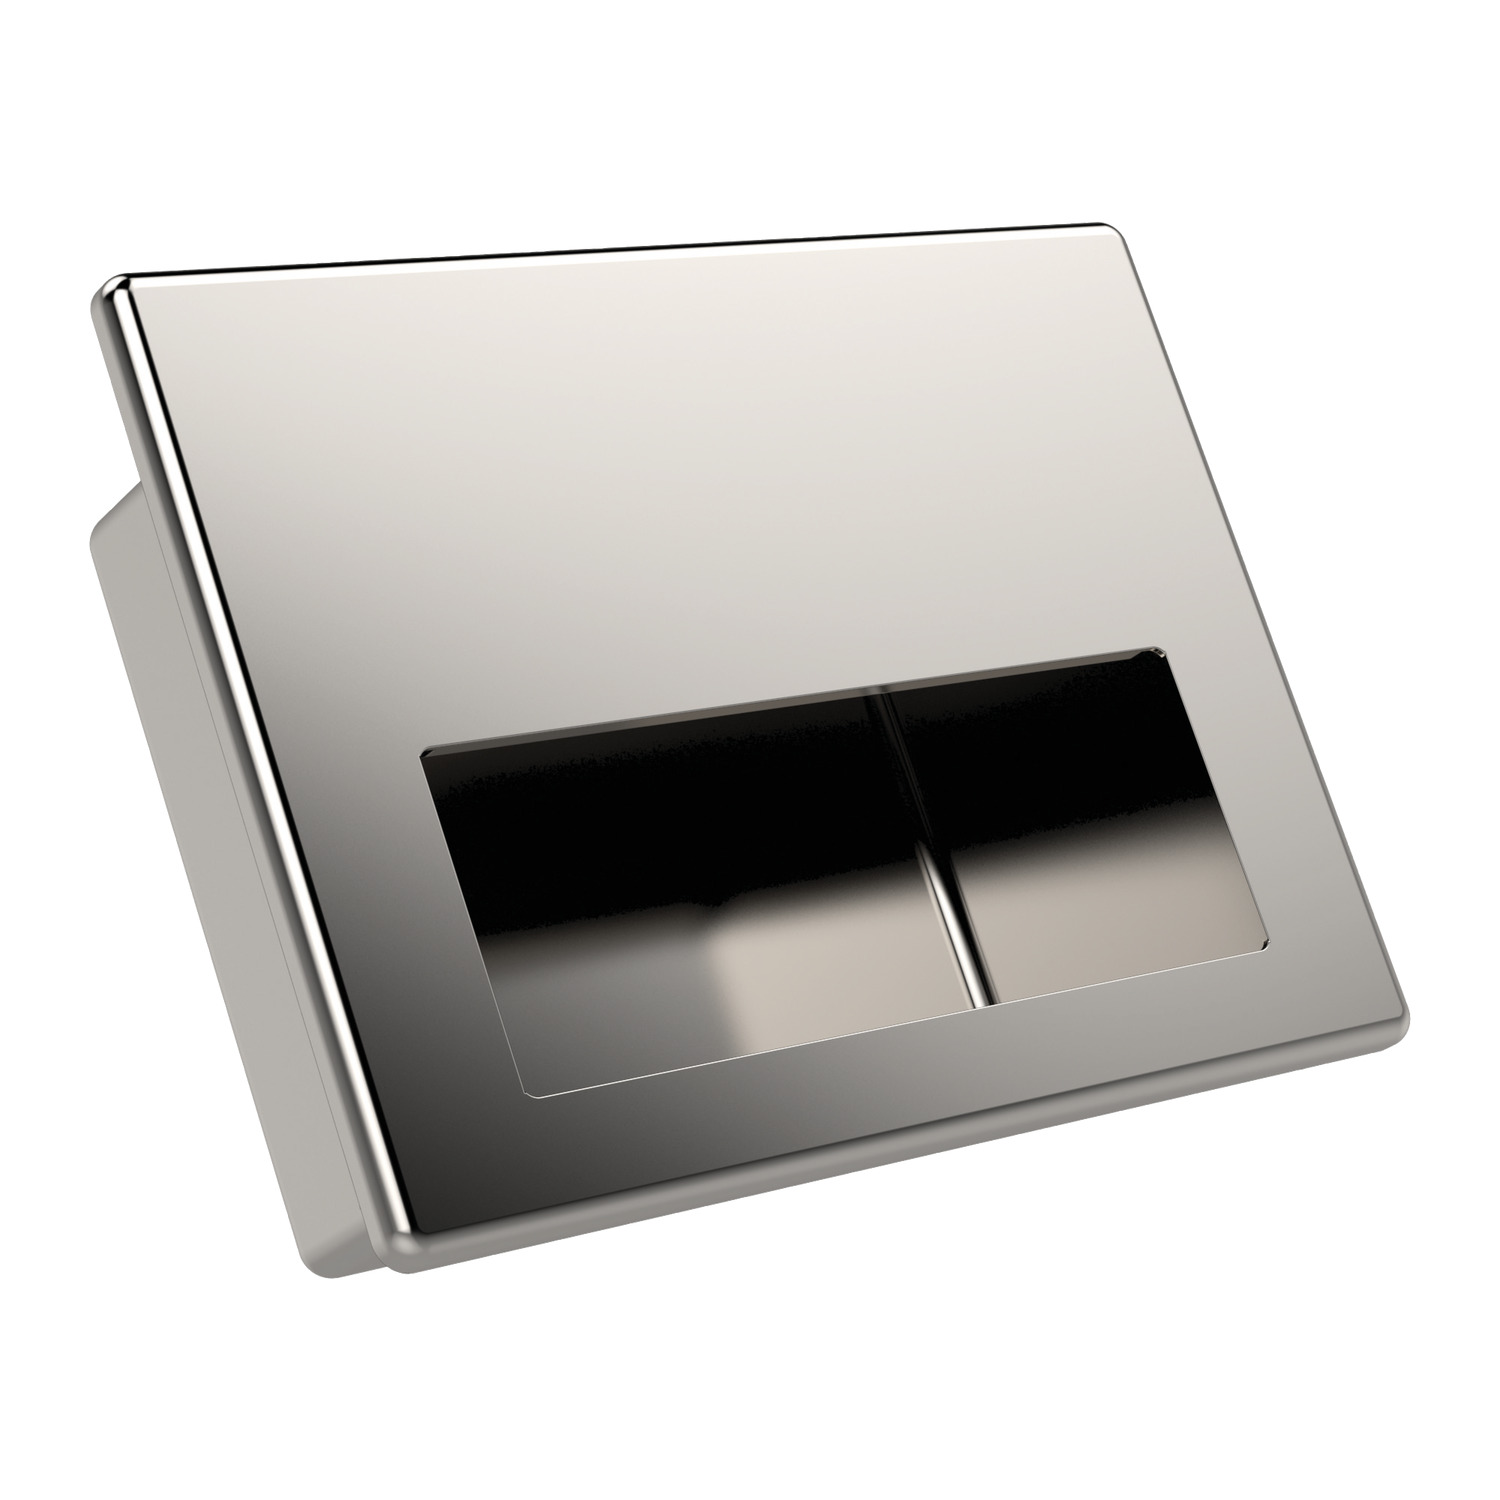 Recessed Pull Handles Stainless steel (AISI 304) with satin finish. Supplied with stainless M5 nut.